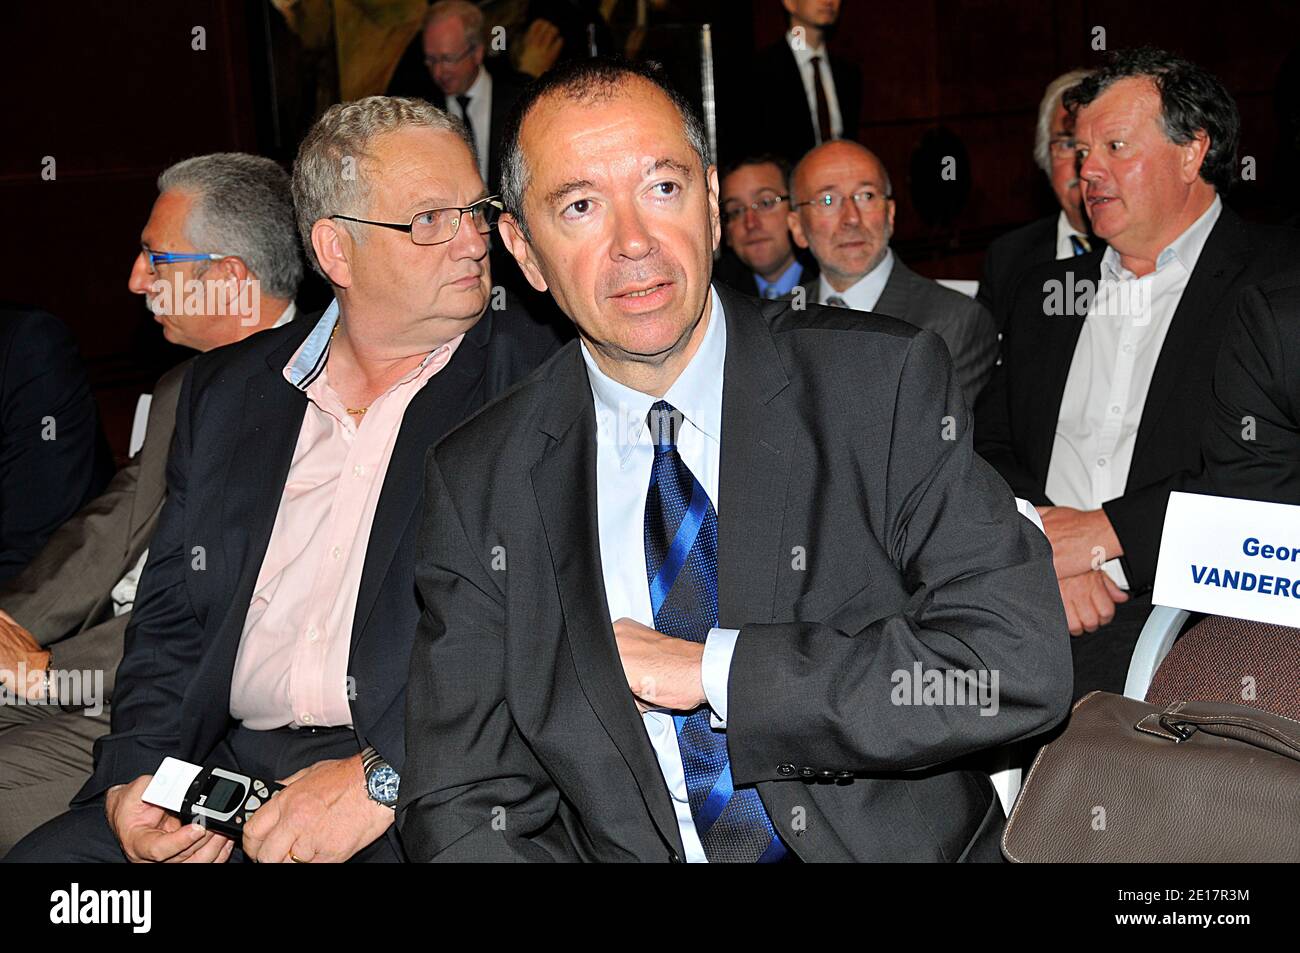 PSG's President Robin Leproux at the FFF (French Federation Football) General assembly during Election of new President Noel Le Graet at Méridien Etoile Hotel in Paris, France on June 18, 2011. Photo by Thierry Plessis/ABACAPRESS.COM Stock Photo